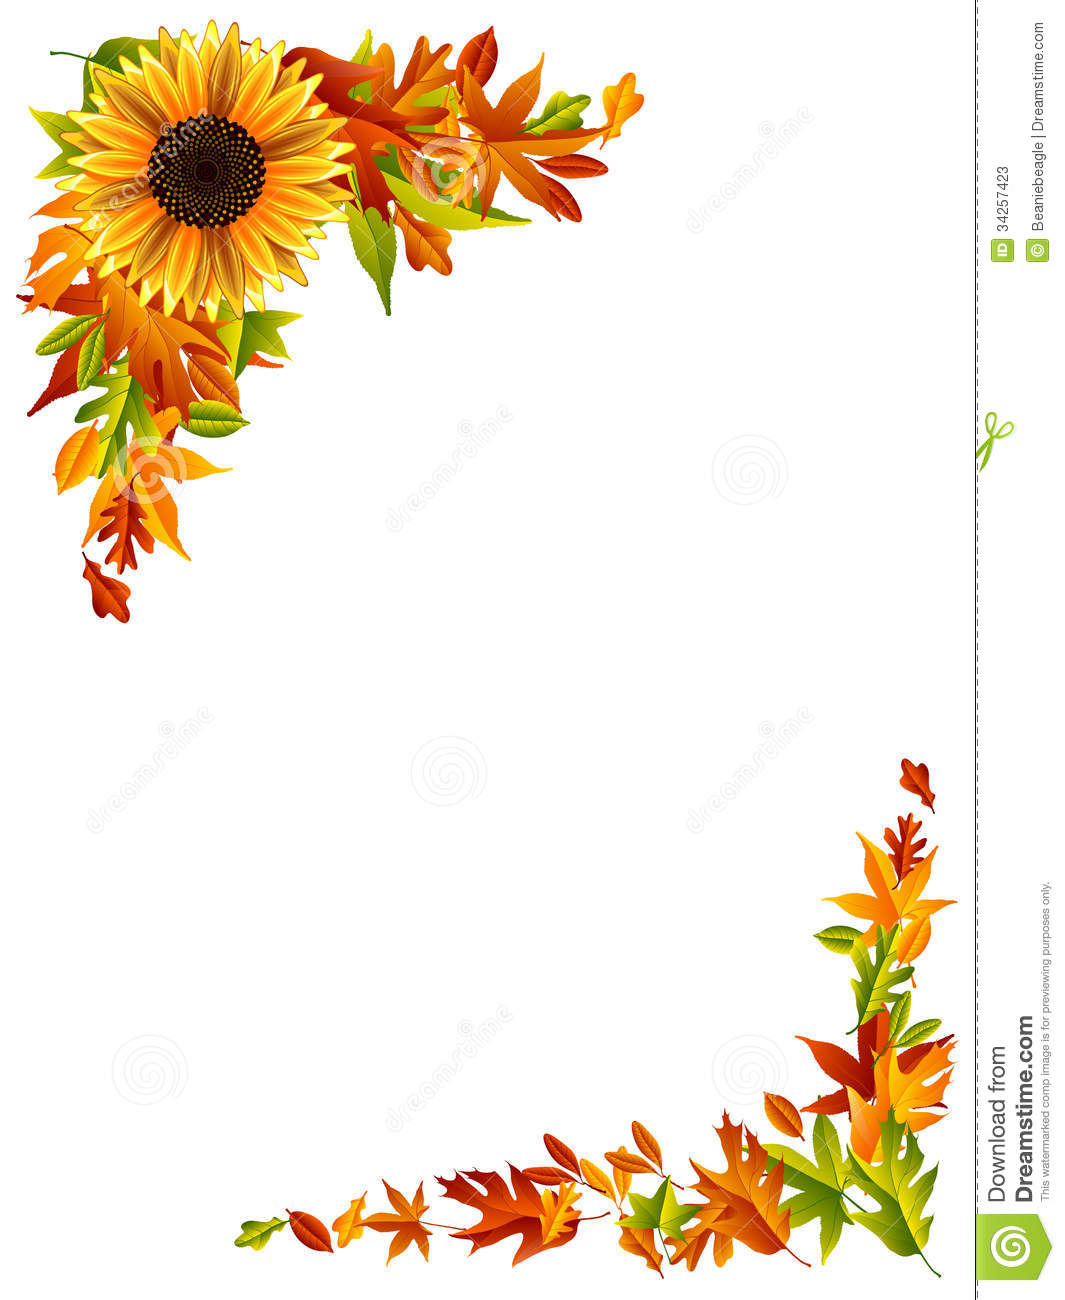 Autumn Clip Art. Resolution 1065x1300 . Resolution 1065x1300 . Free Thanksgiving Borders And Frames ...